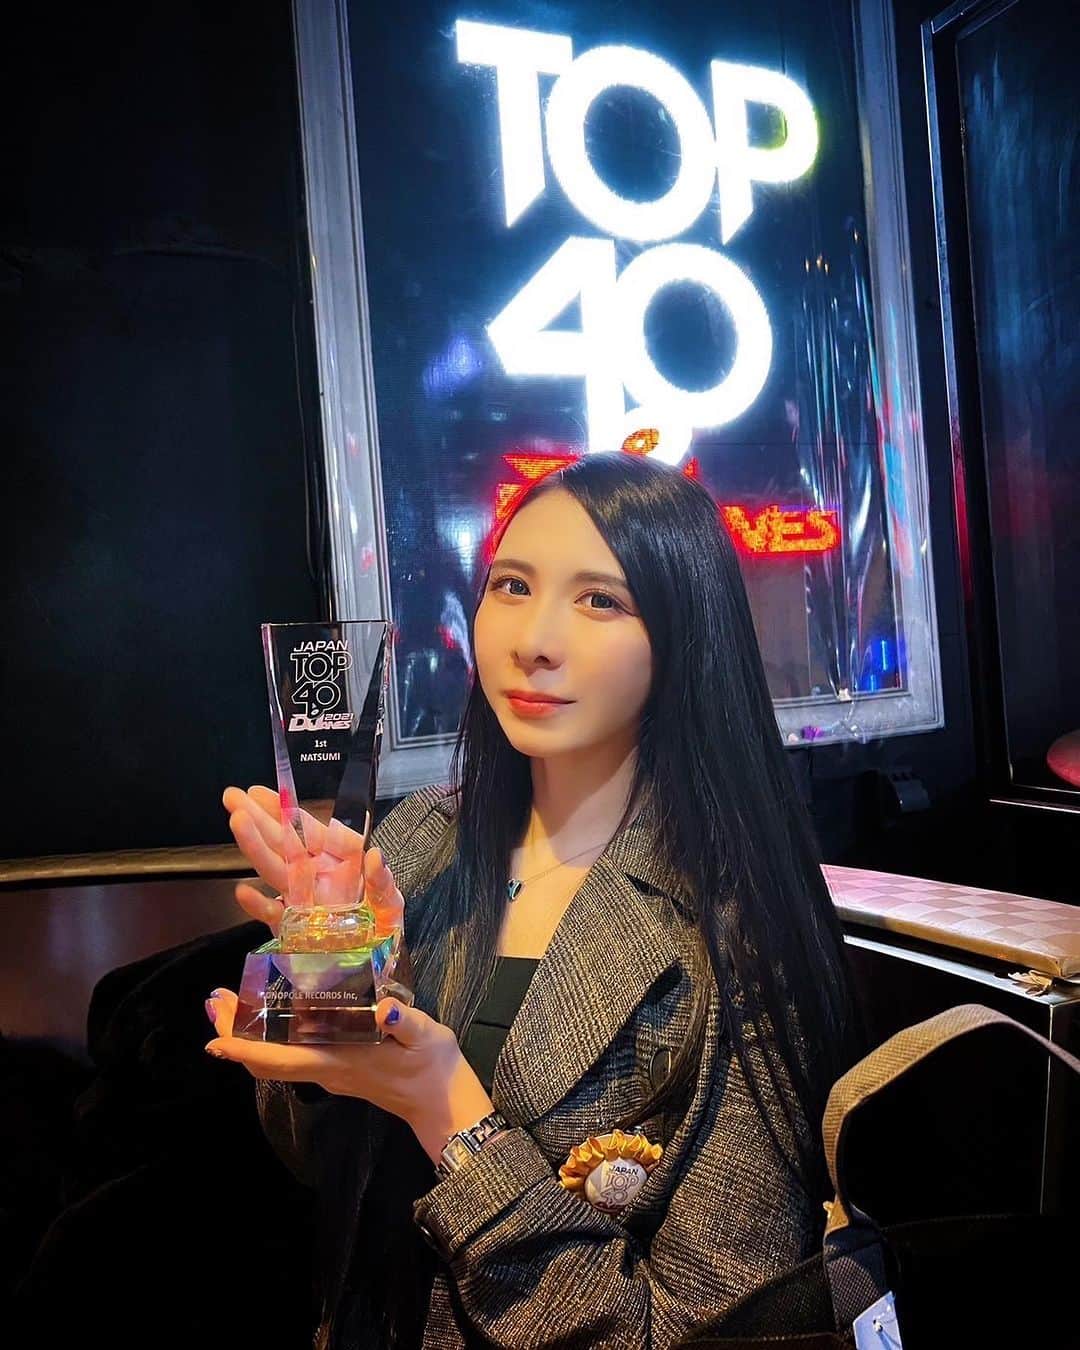 DJ NATSUMIのインスタグラム：「🎧DJanemag ASIA TOP 50🎧 The voting period has ended! I'm so happy to get reports that so many people voted for me.🥰 I appreciate it very much!🙏🏻  To be honest, I was not sure if I would participate in this year's ranking. After holding the No.1 position in Japan for three years, the anxiety and pressure of whether I can meet everyone's expectations made me feel like my heart is breaking every year at this time.  Of course I know that rankings are not everything and as one of my fans told me. "No matter what the ranking of NATSUMI is, you are the best in my mind and I will continue to support you." I almost cried and my heart was saved.  So, I did not give up trying. And since I don't have a strong connections, such as a support team, I have to keep trying dozens of times harder than some others. I knew that if I ran away because I was afraid of the outcome, nothing would come of it.  If I get any result, I will accept it and work even harder in the future, and I will keep challenging myself for the sake of my fans and junior DJs who believe in me. I will do my best for those who support me! So please continue to watch my life of activities!🦄  @djanemagasia @djanemagtour  @discoverfeednetwork @djanemag #DJaneMagAsia #DiscoverFeed #Top50Djanes #AsianDJTalent  .」